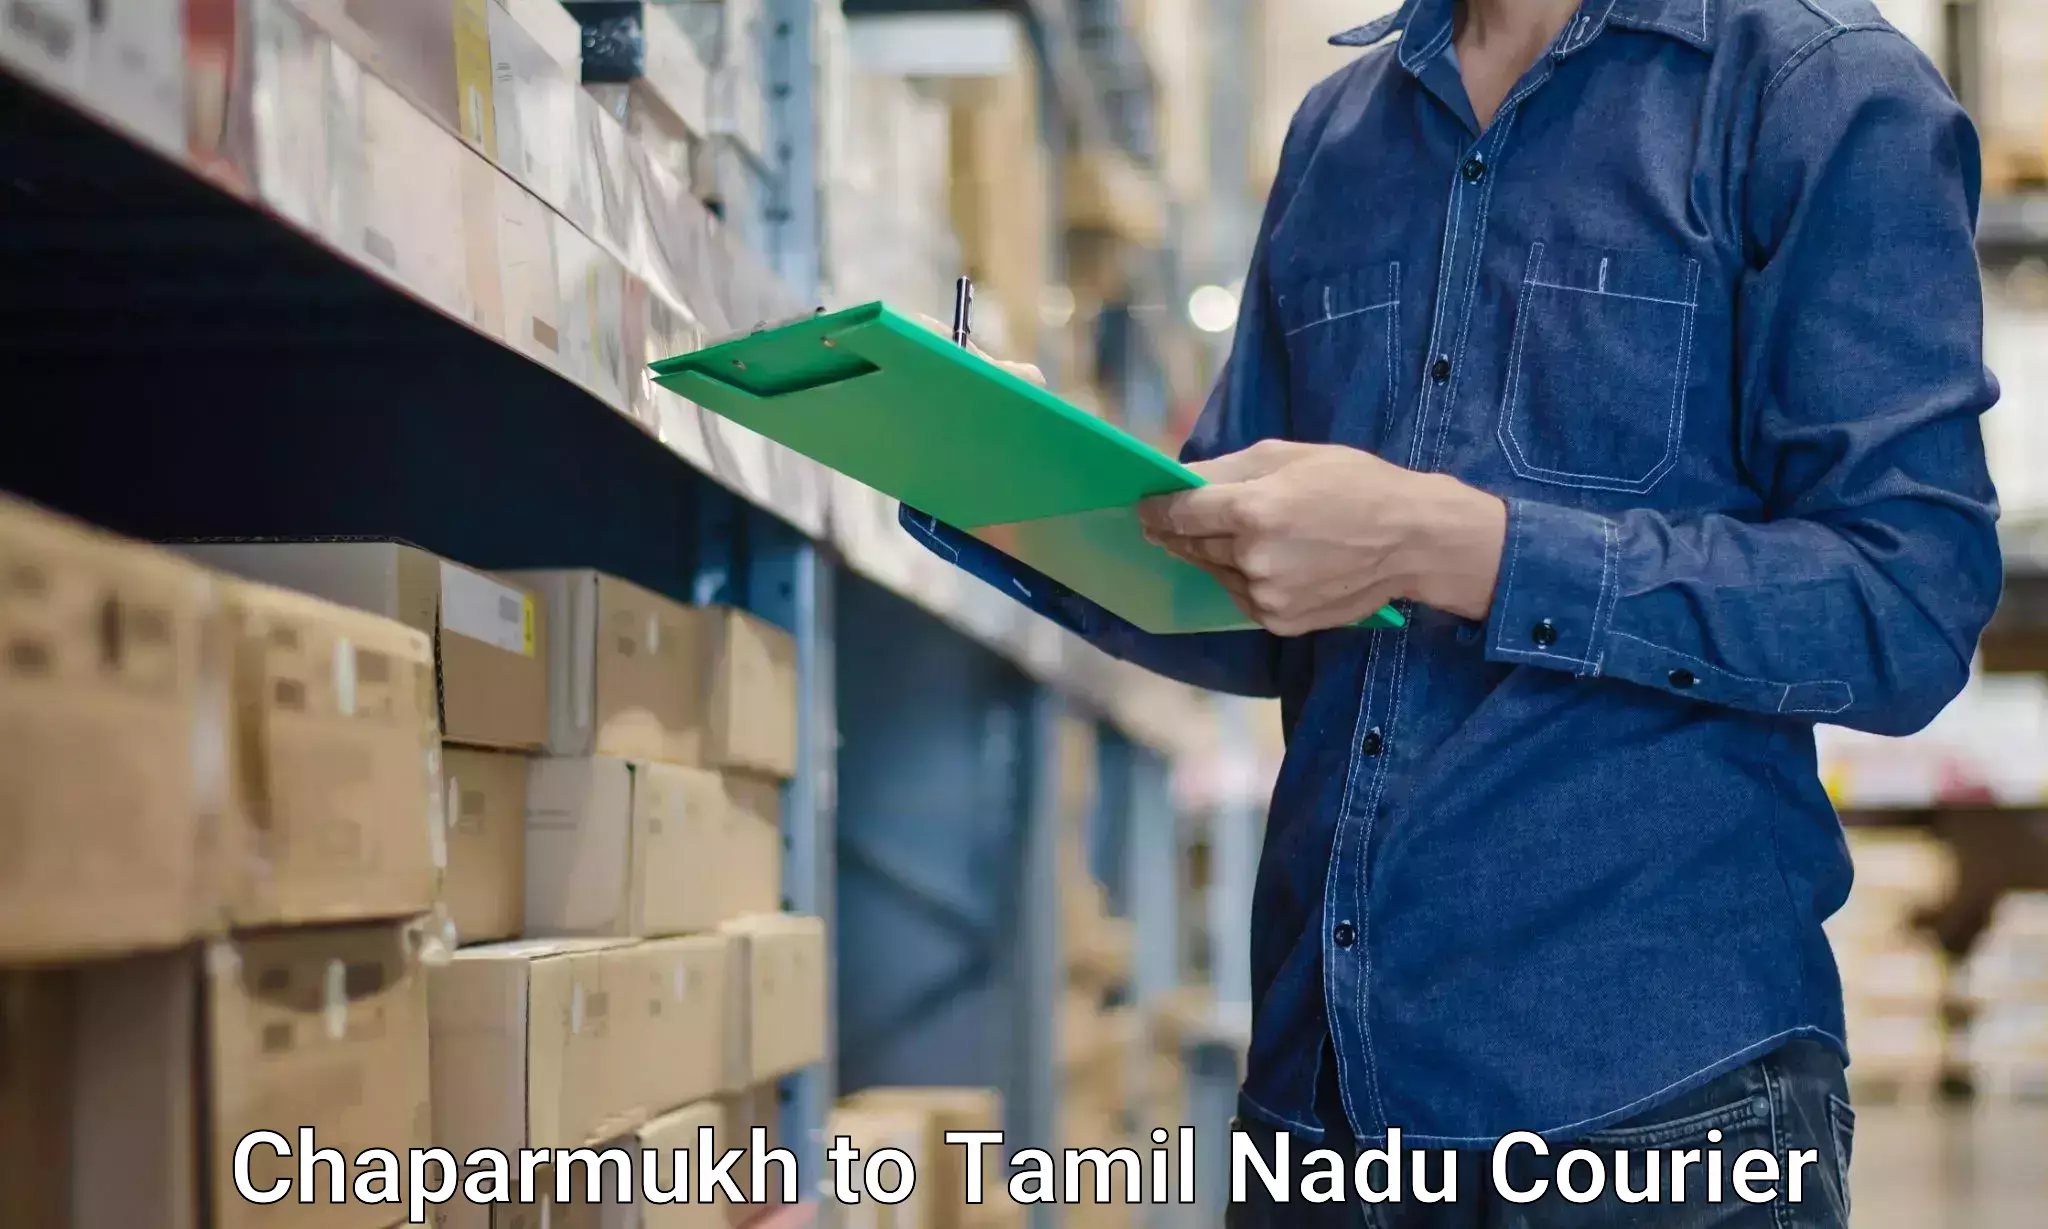 Professional movers and packers Chaparmukh to Mayiladuthurai